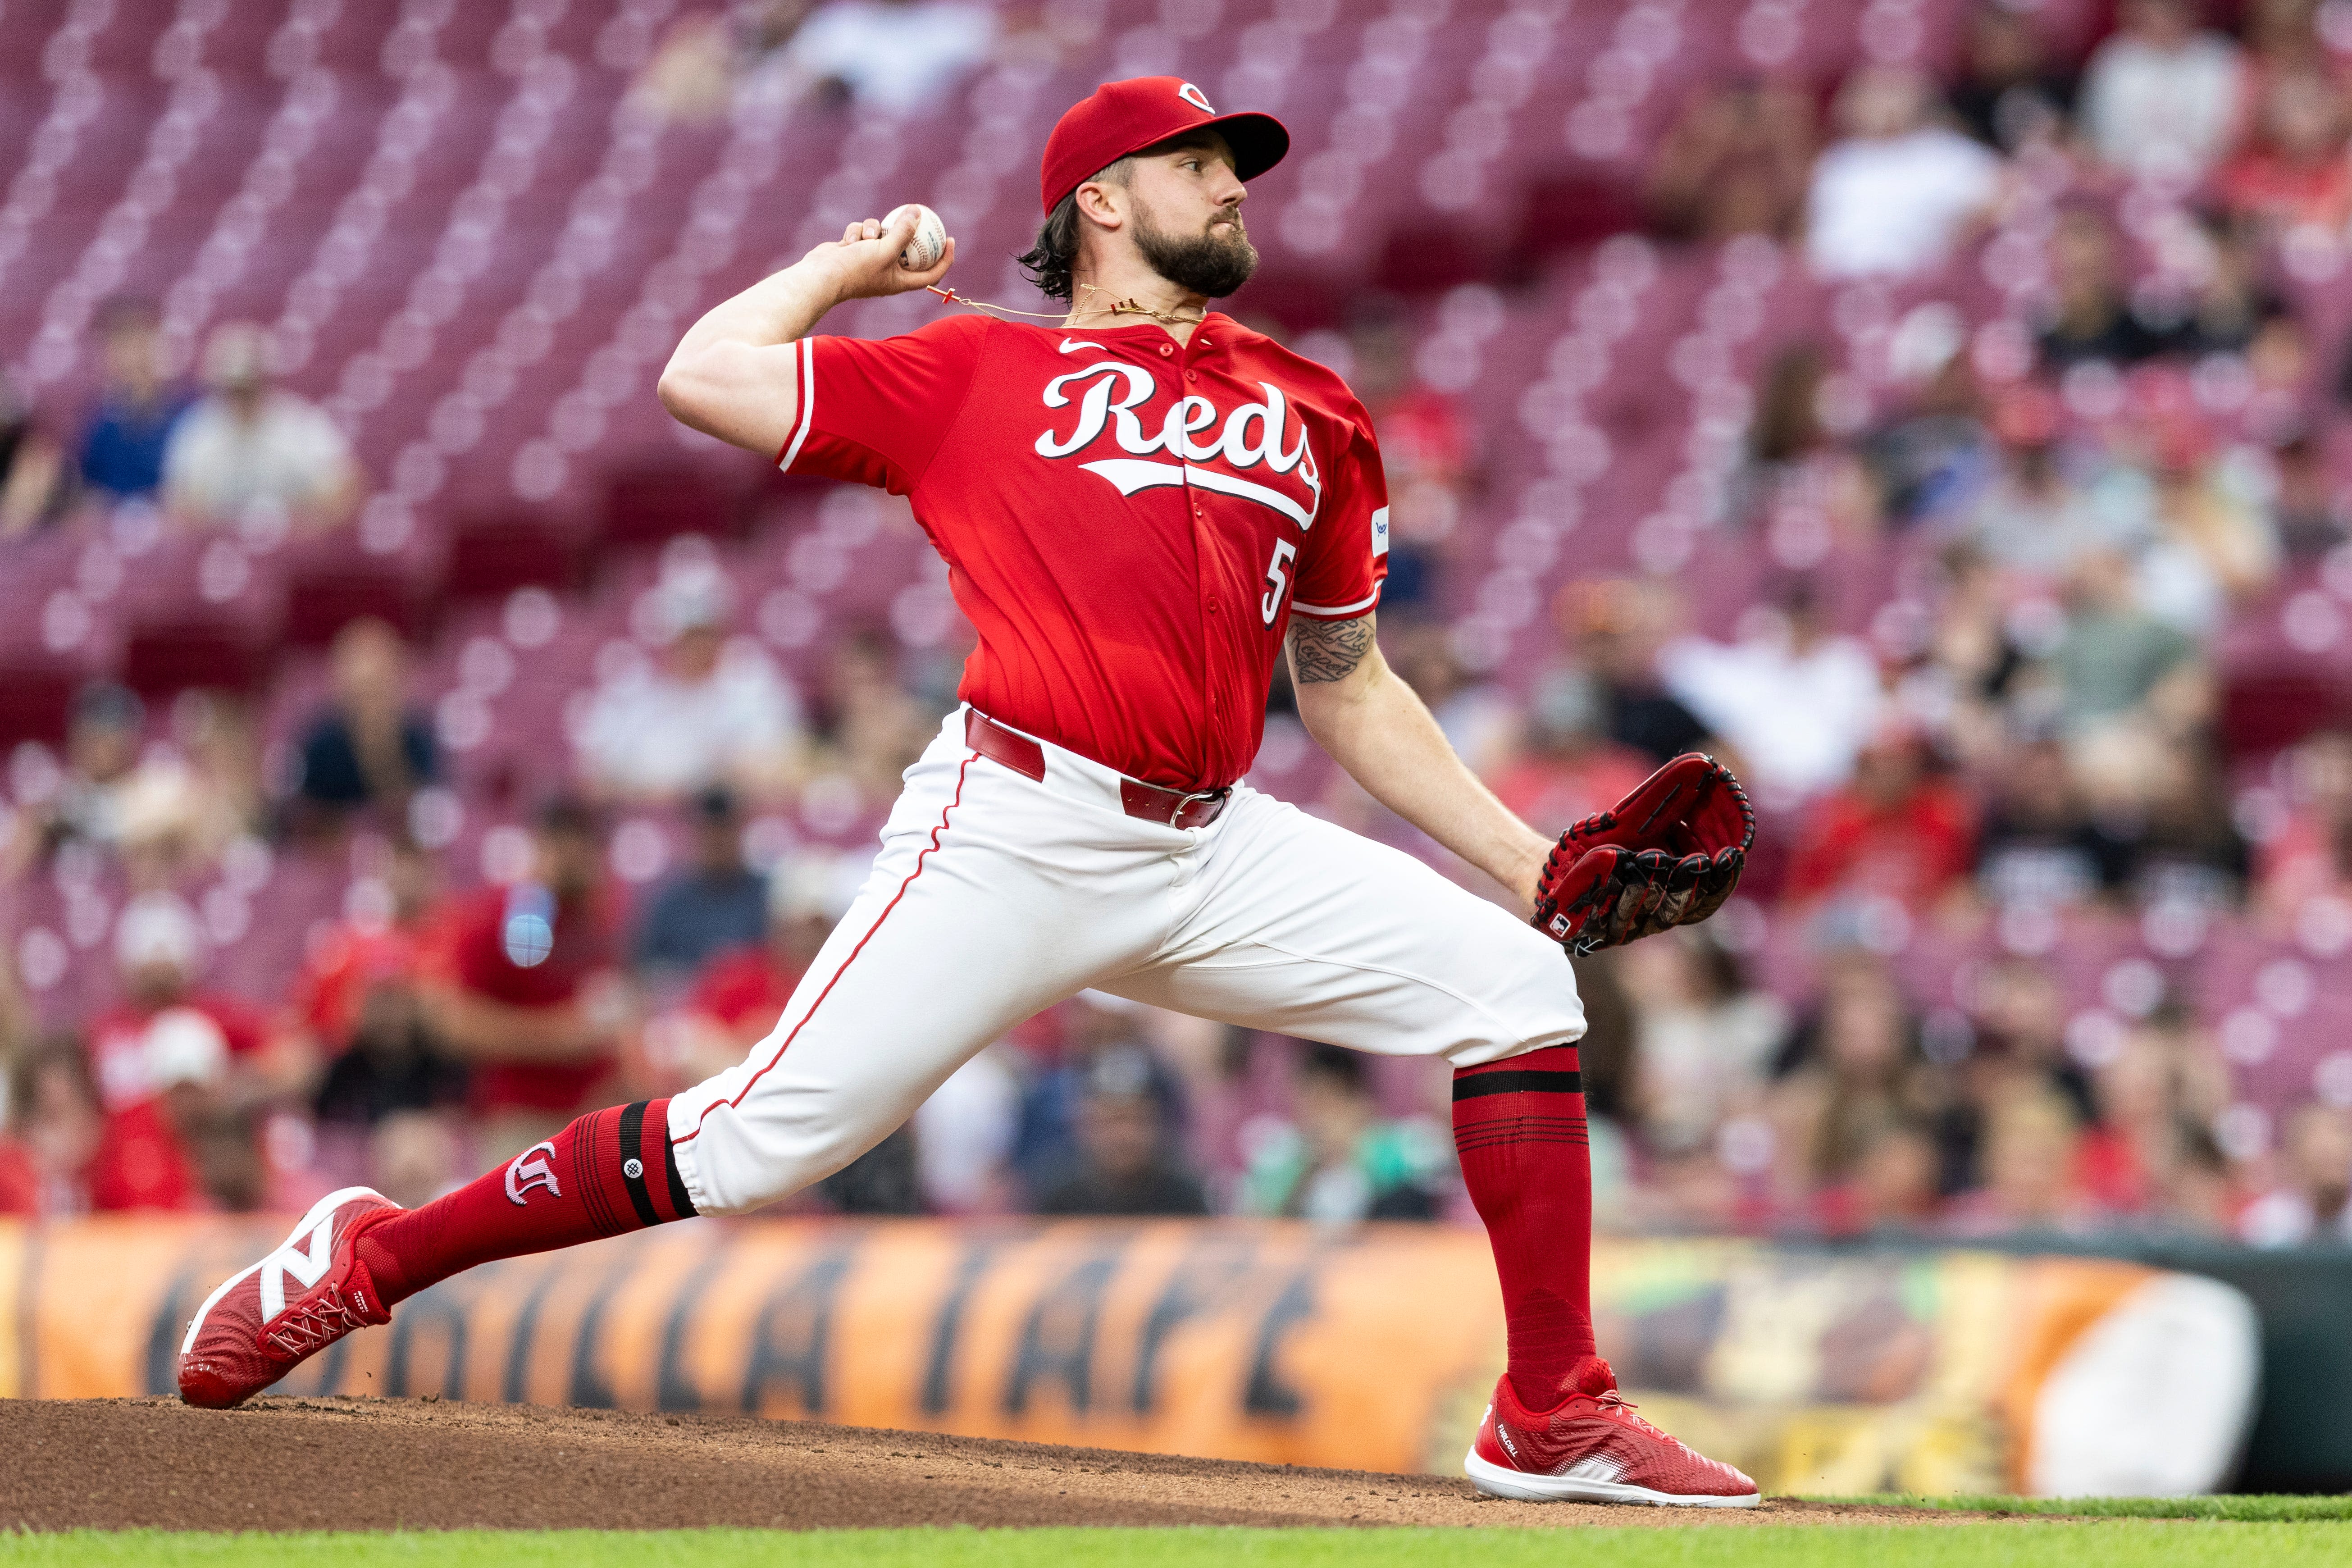 Reds looking for three-game sweep of Rockies Wednesday afternoon